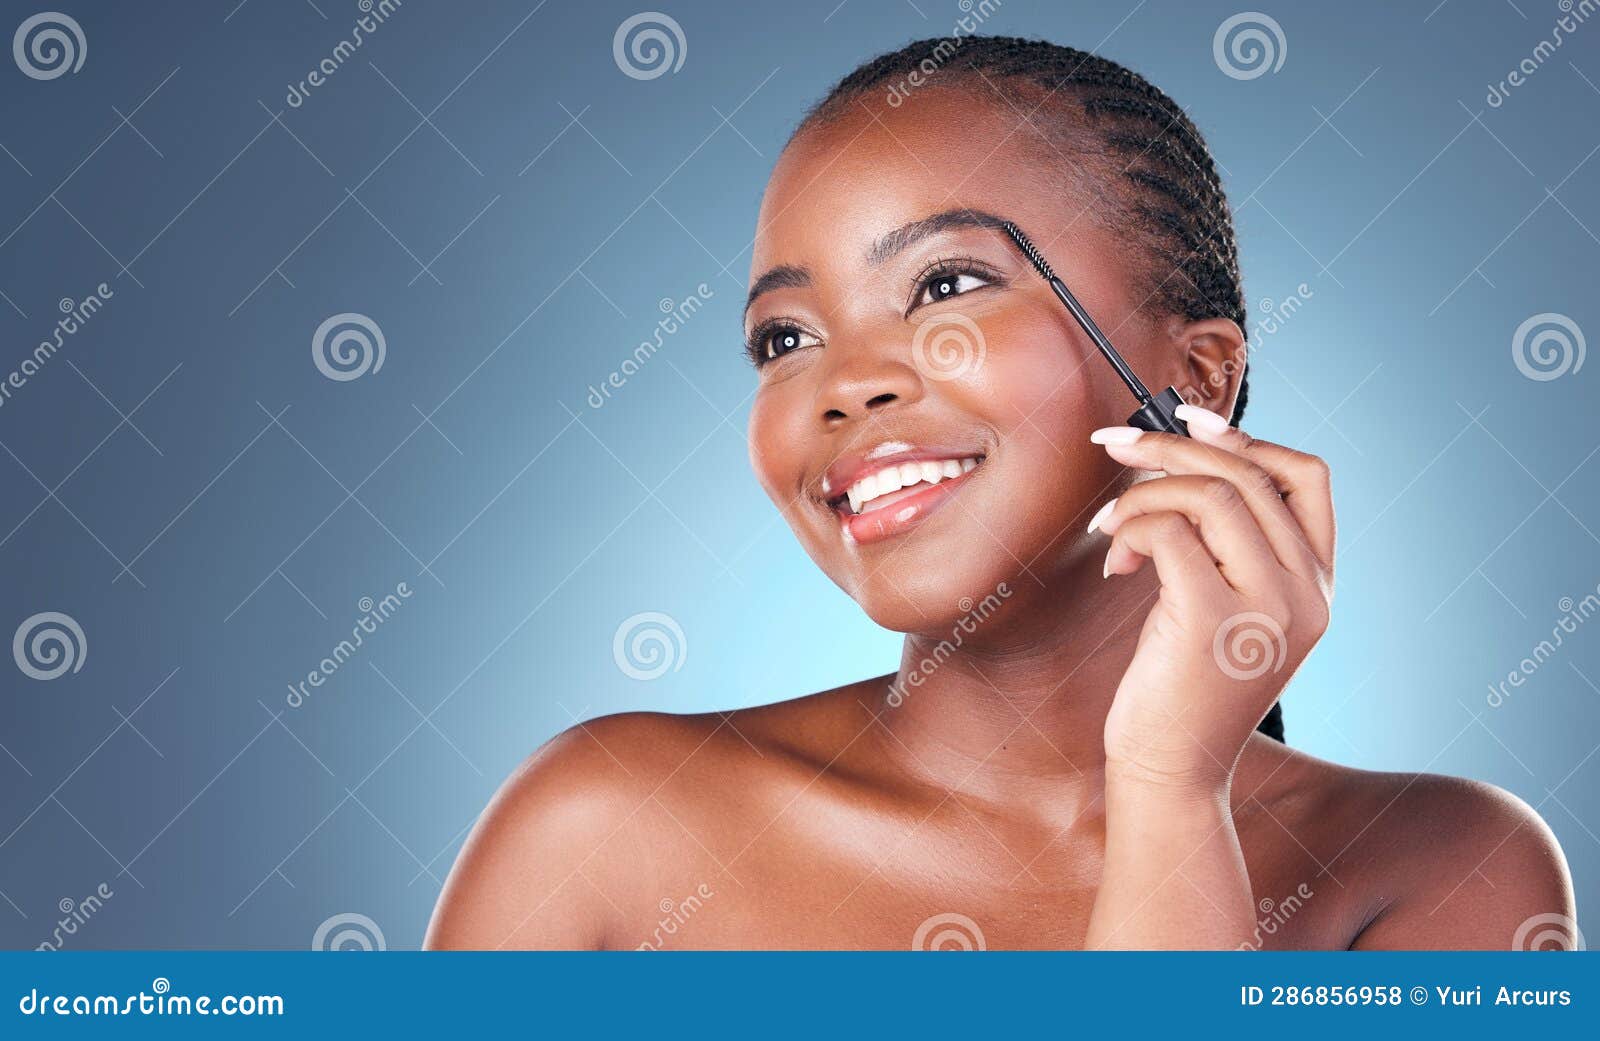 face brush, eyebrow and beauty of a woman with dermatology, natural makeup and smile. happy african person on blue